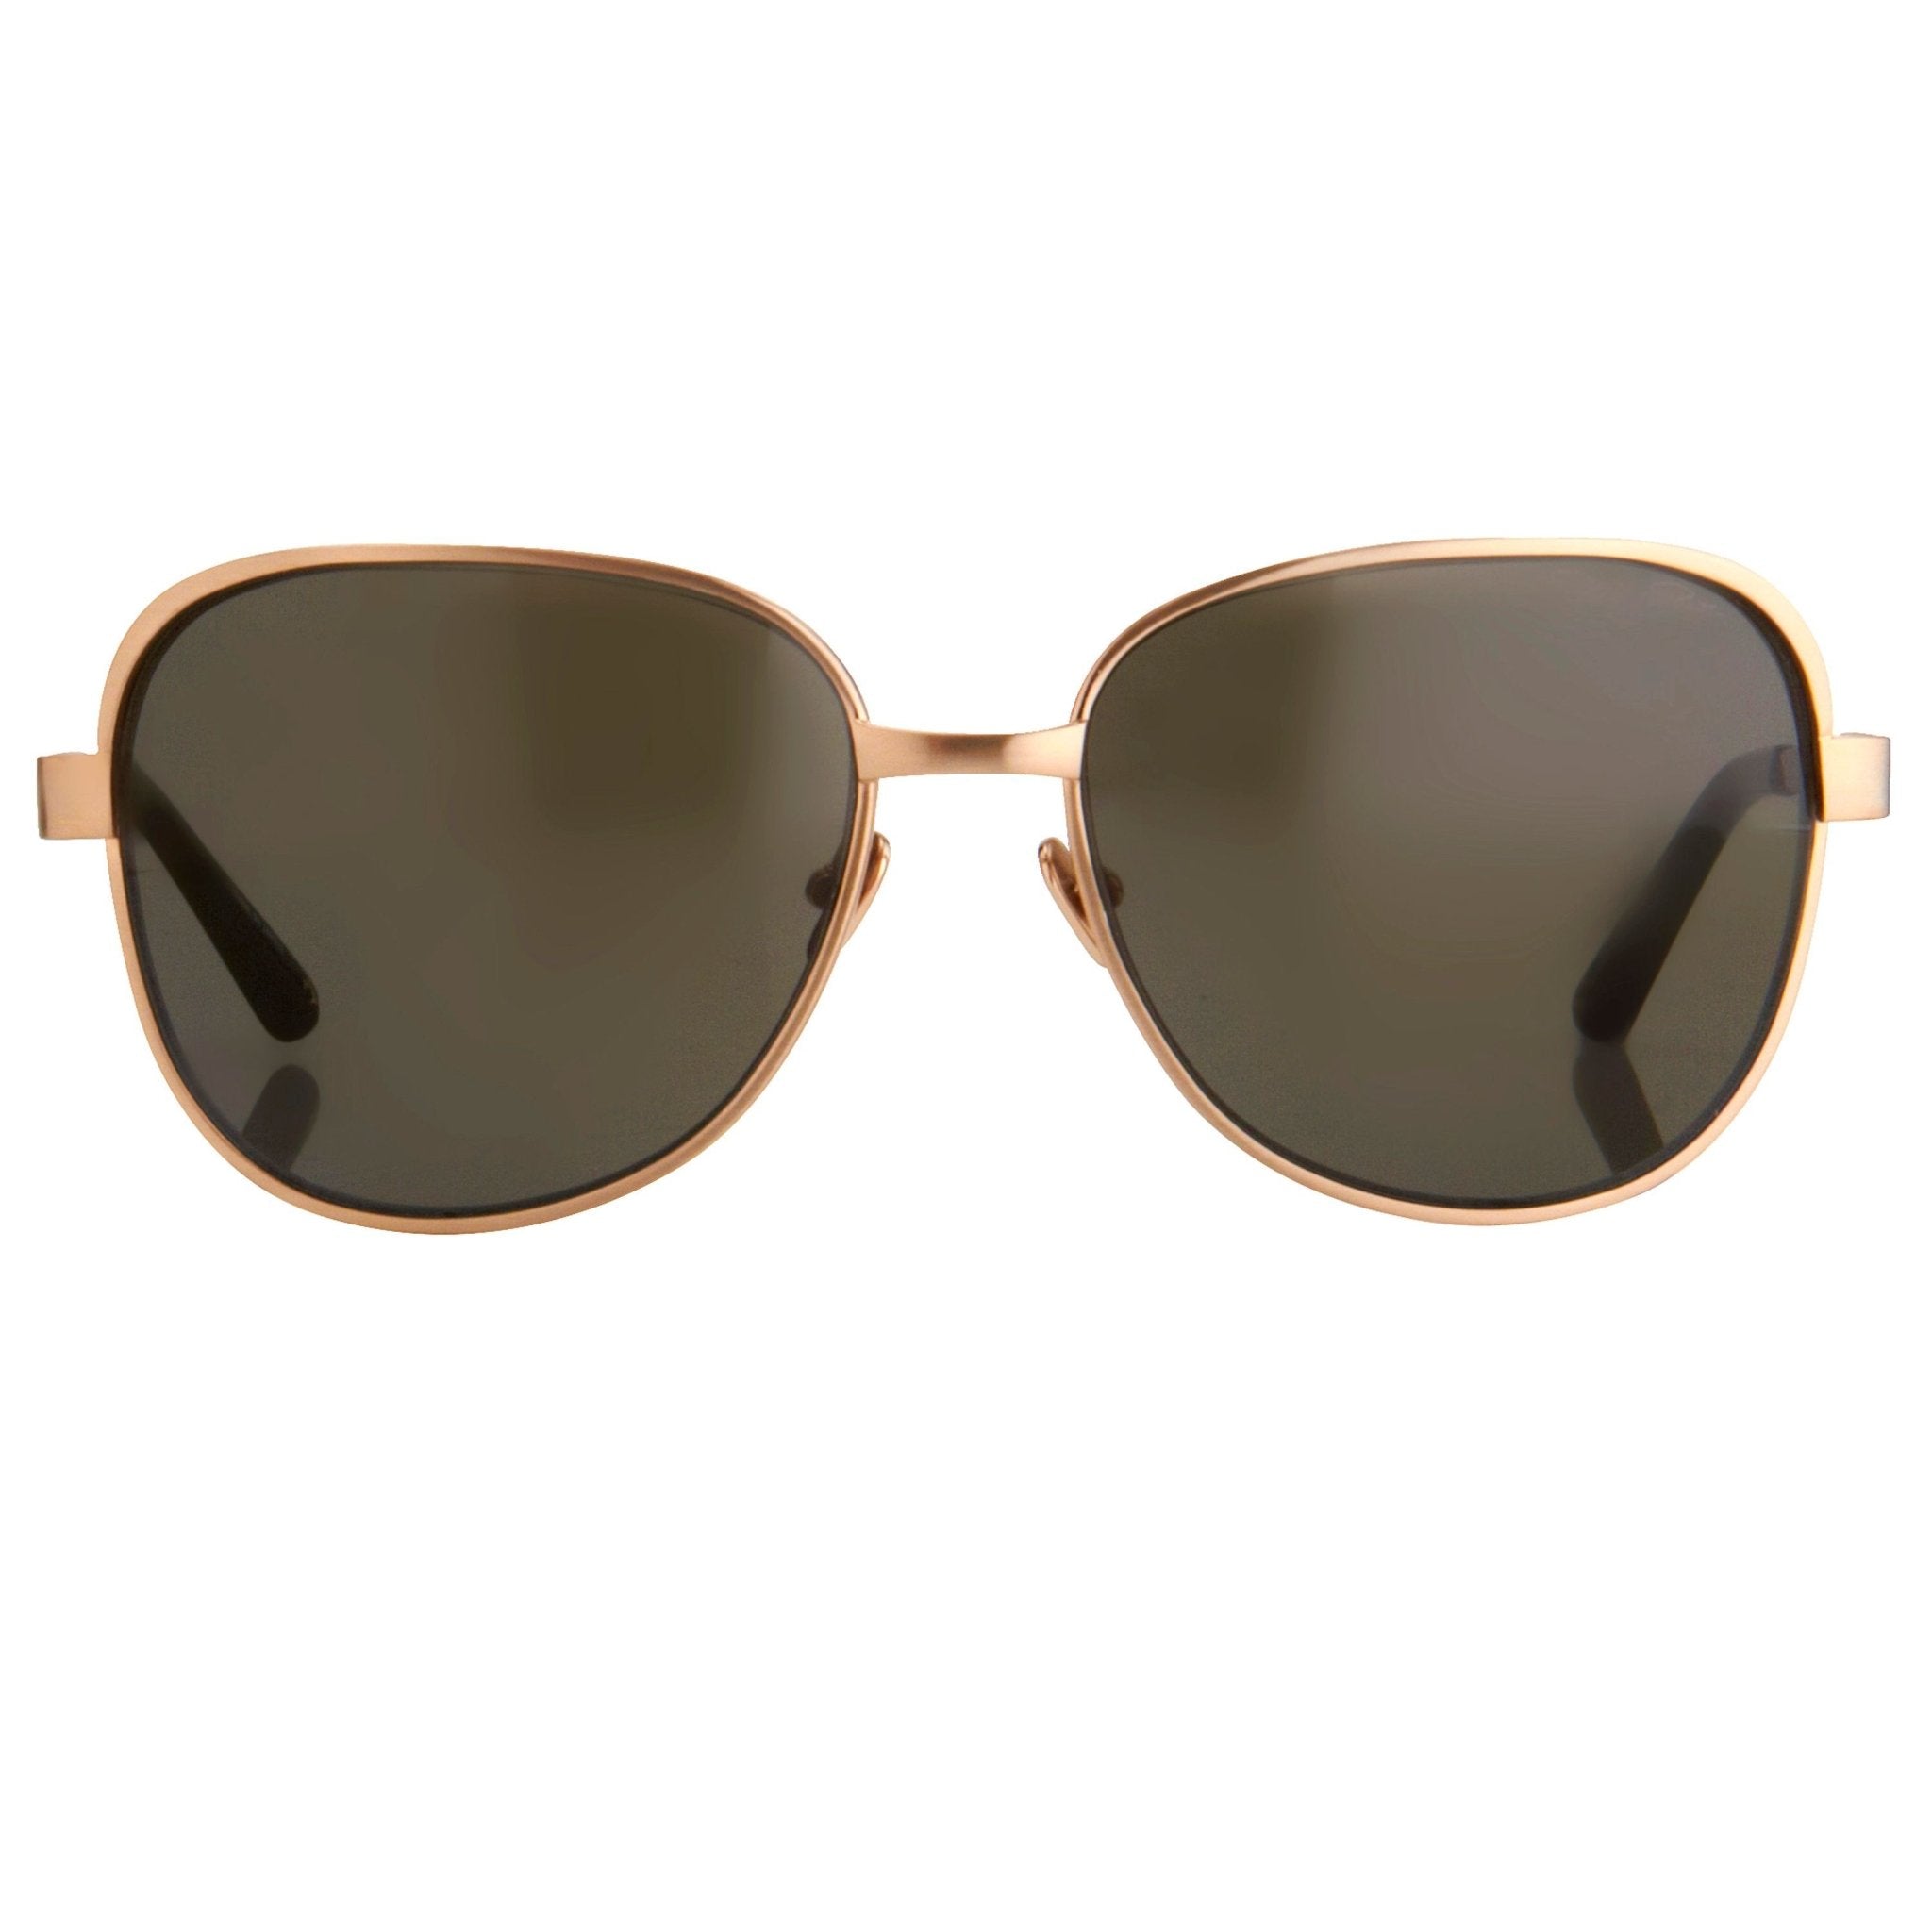 Oscar De La Renta Sunglasses Oversized Frame Rose Gold and Green Lenses Category 3 - ODLR32C2SUN - Watches & Crystals